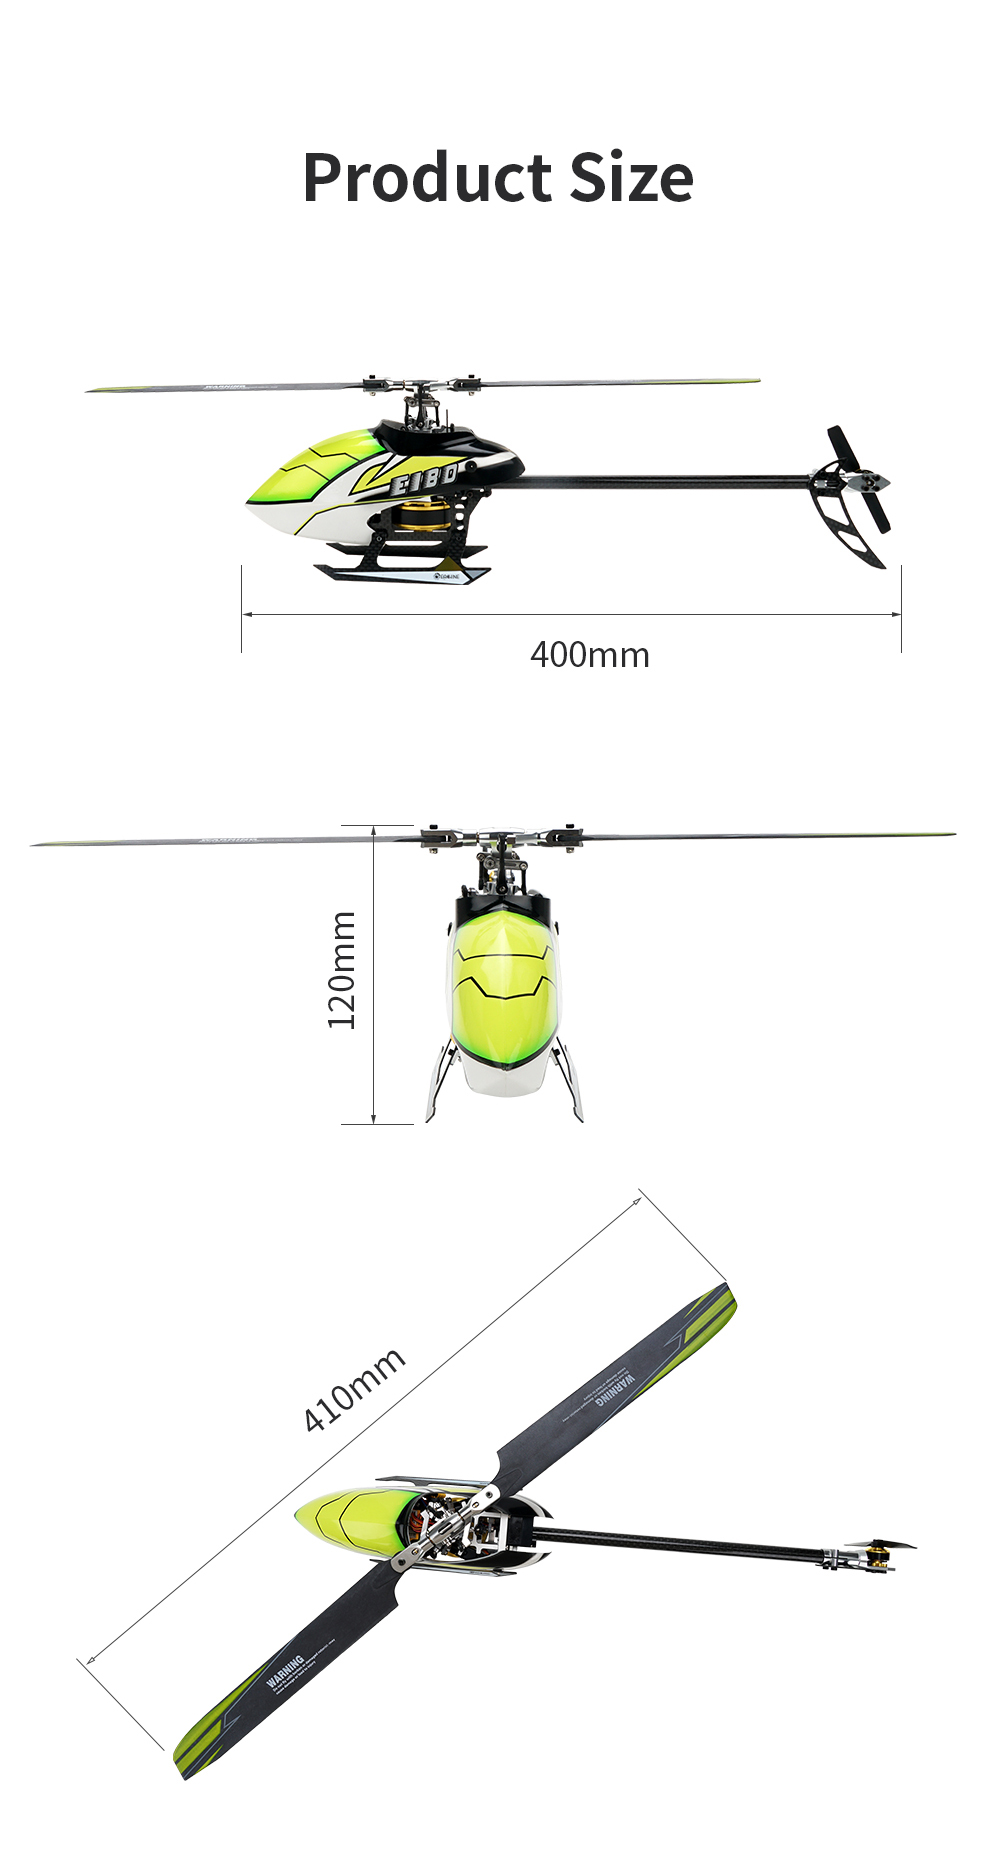 Eachine-E180-6CH-3D6G-System-Dual-Brushless-Direct-Drive-Motor-Flybarless-RC-Helicopter-RTF-Compatib-1810191-17